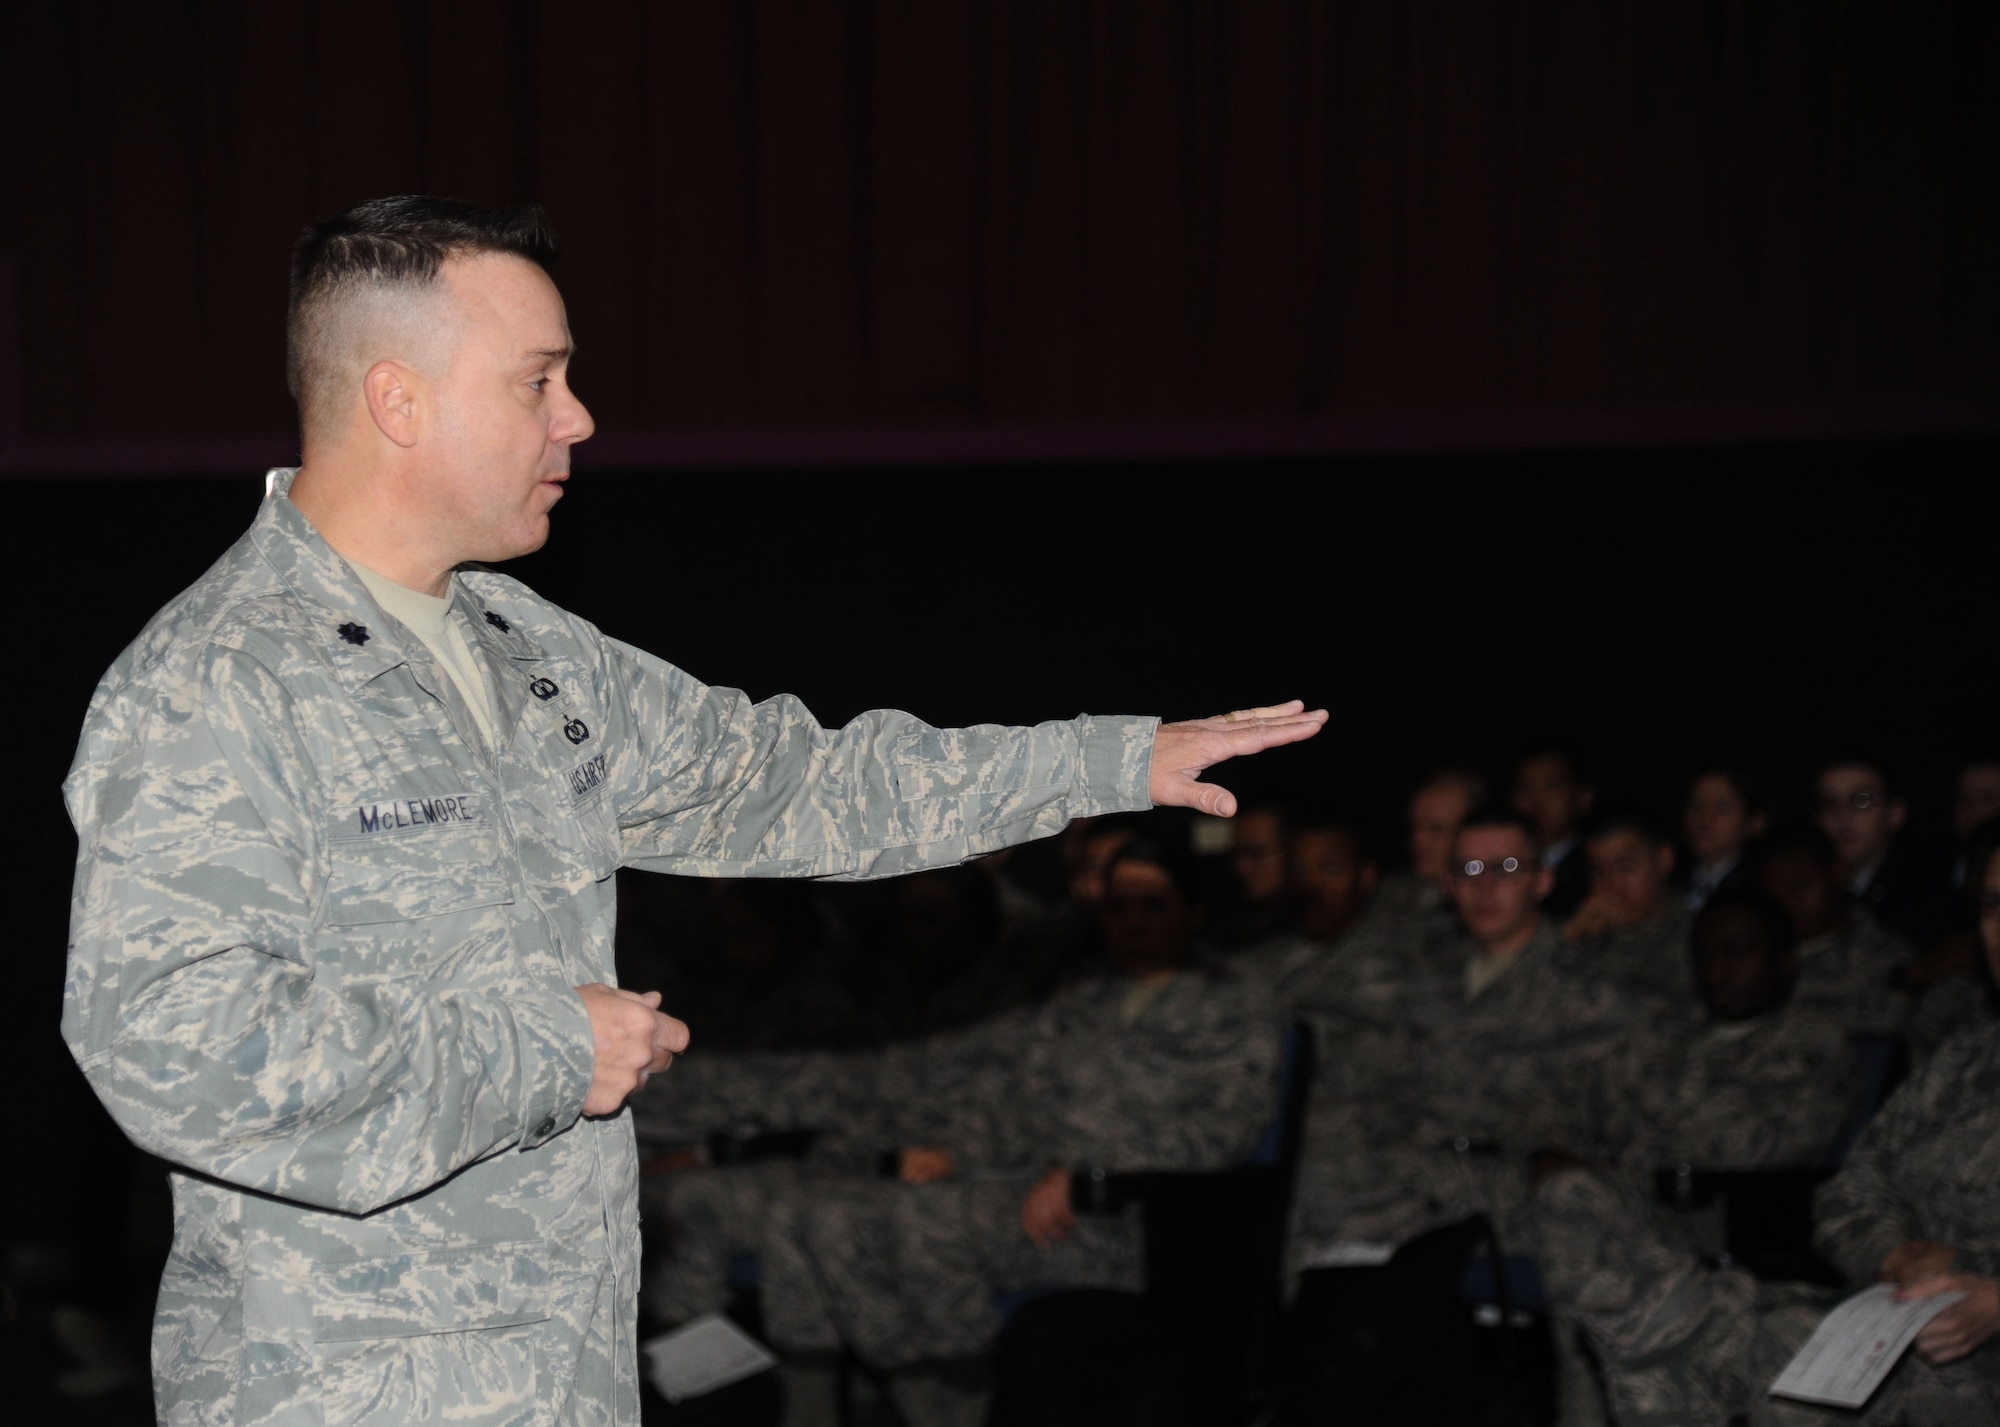 Lt. Col. Jeffrey McLemore, 81st Training Group deputy commander, speaks to technical training students during the transition briefing Feb. 14, 2014, at the Welch Theater, Keesler Air Force Base, Miss.  The transition briefing is required for all Airmen who are transitioning up to the advanced transition phase (ATP) which allows them to go off base.  It helps reestablish expectations of proper conduct for those Airmen who have displayed proper Airmanship while at Keesler. (U.S. Air Force photo by Kemberly Groue)